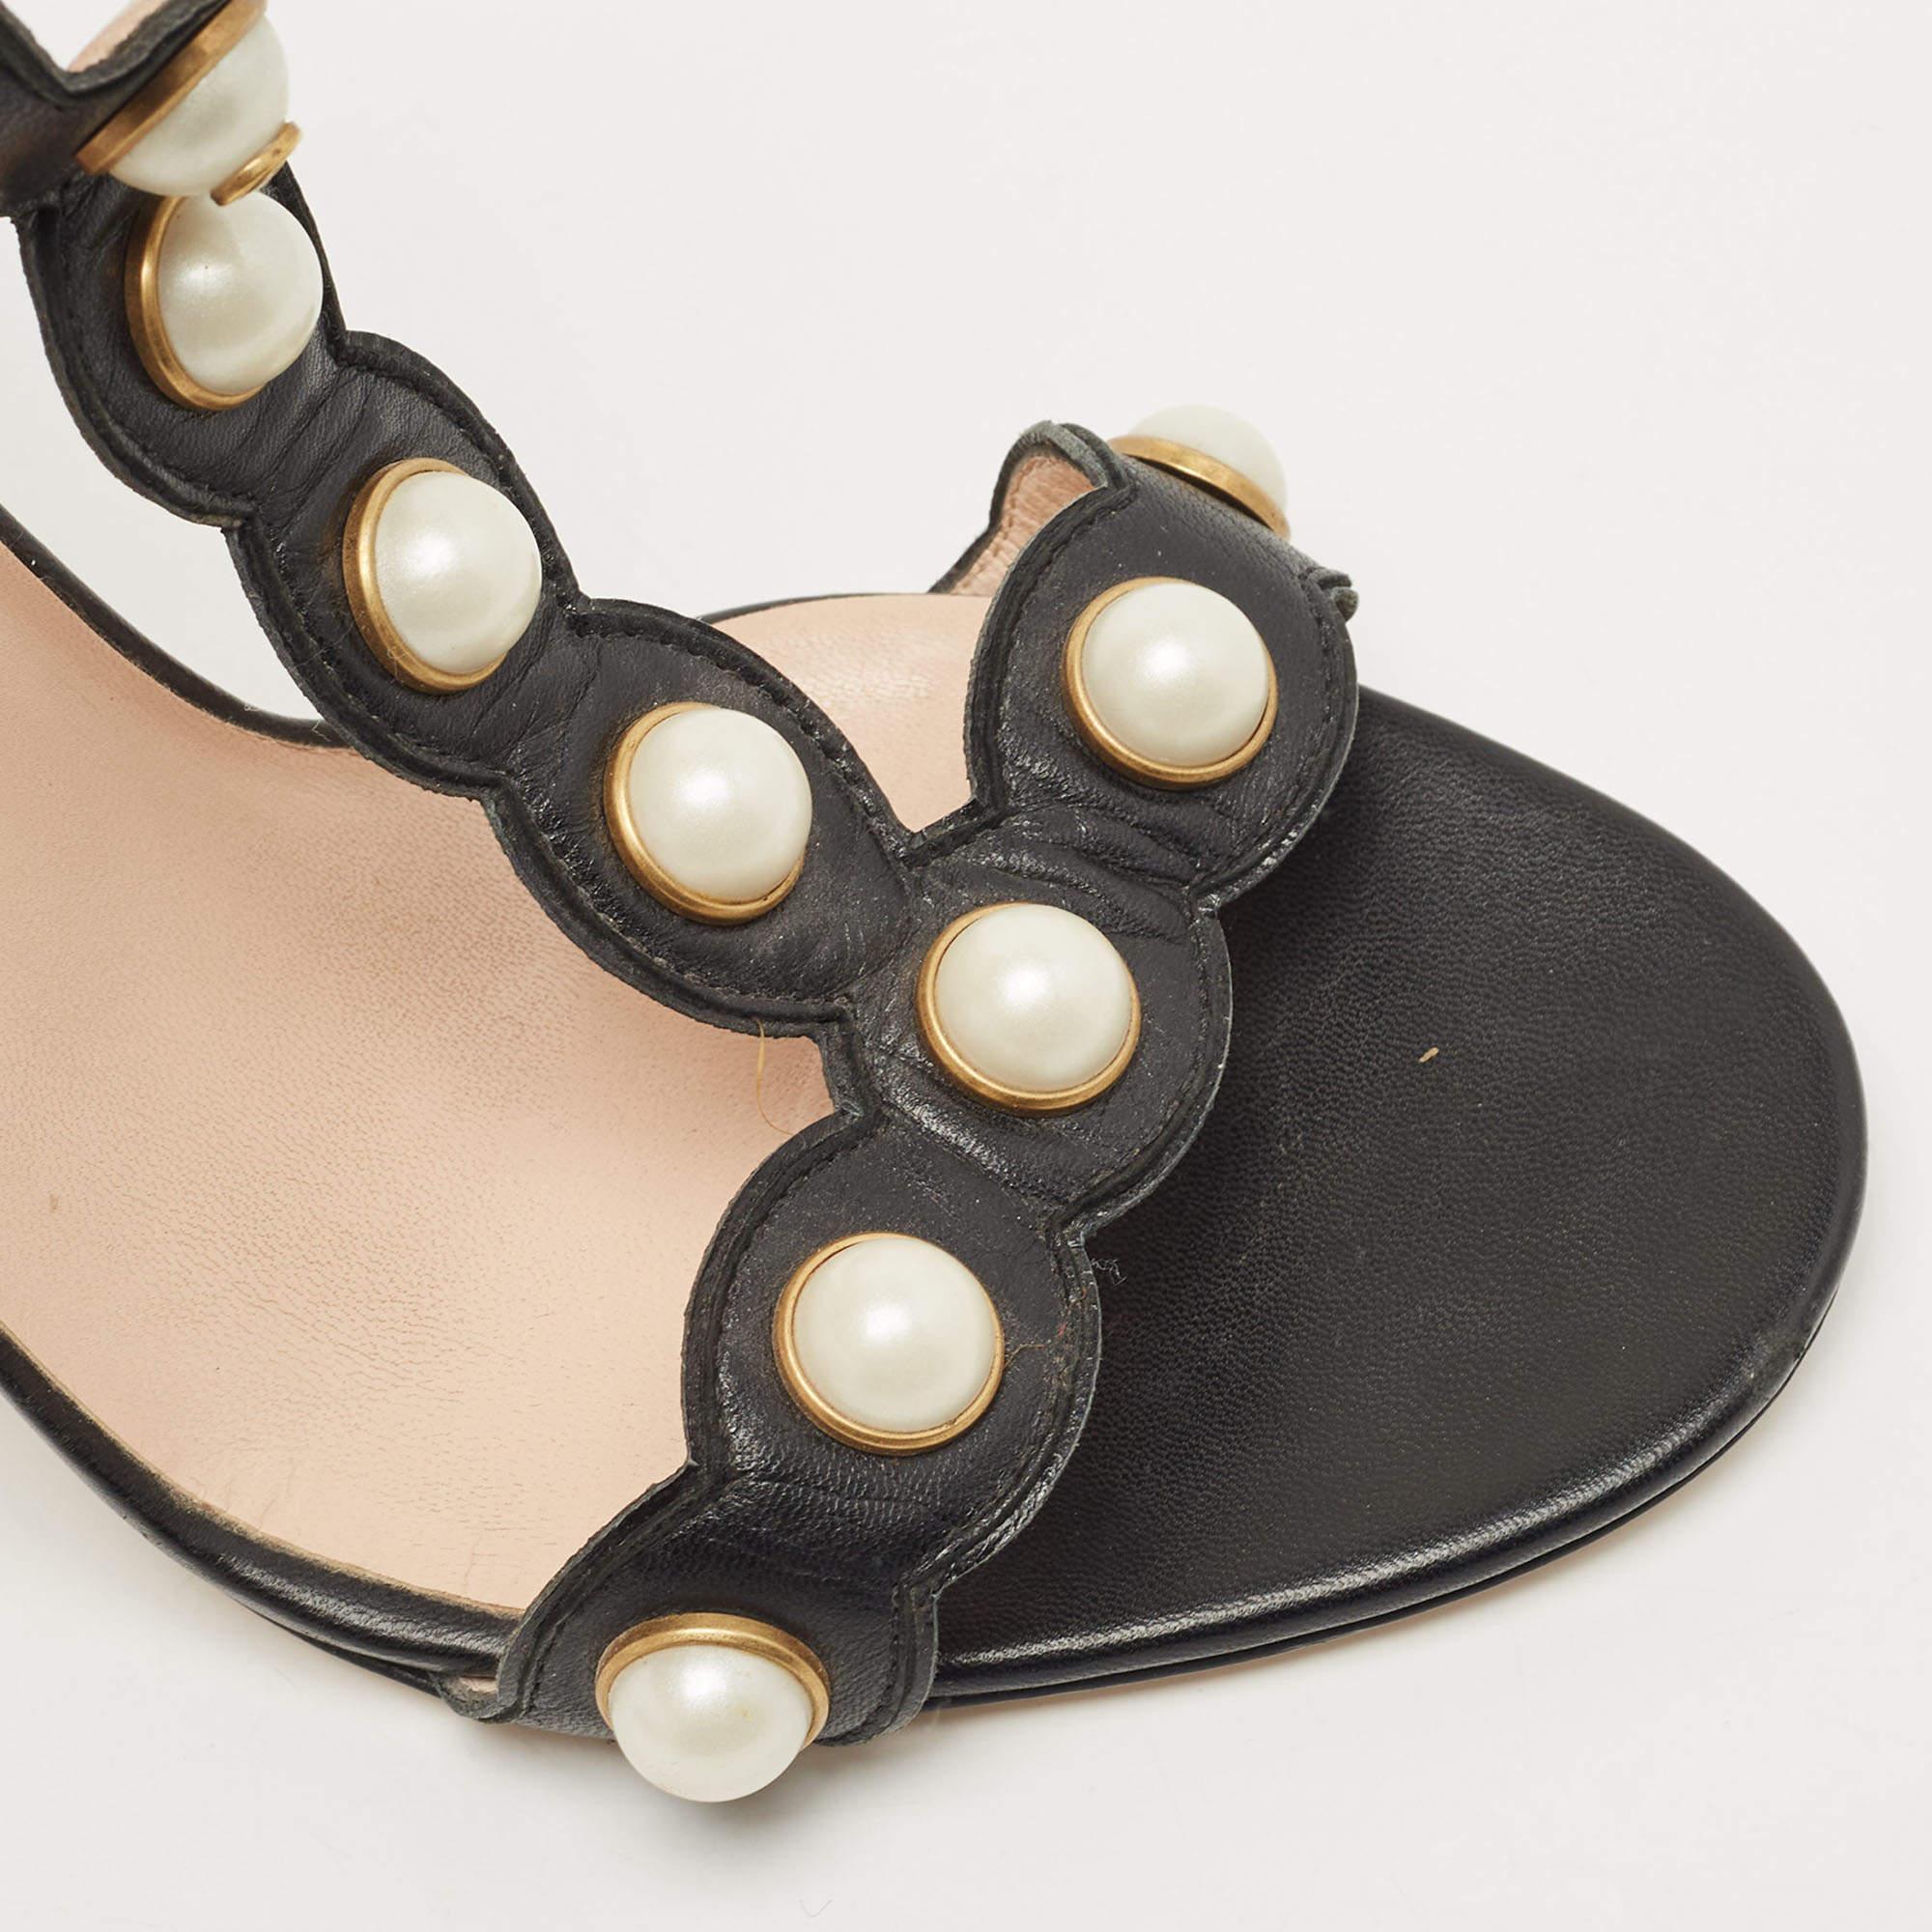 Gucci Black Leather Faux Pearl Willow T-Strap Sandals Size 39 1